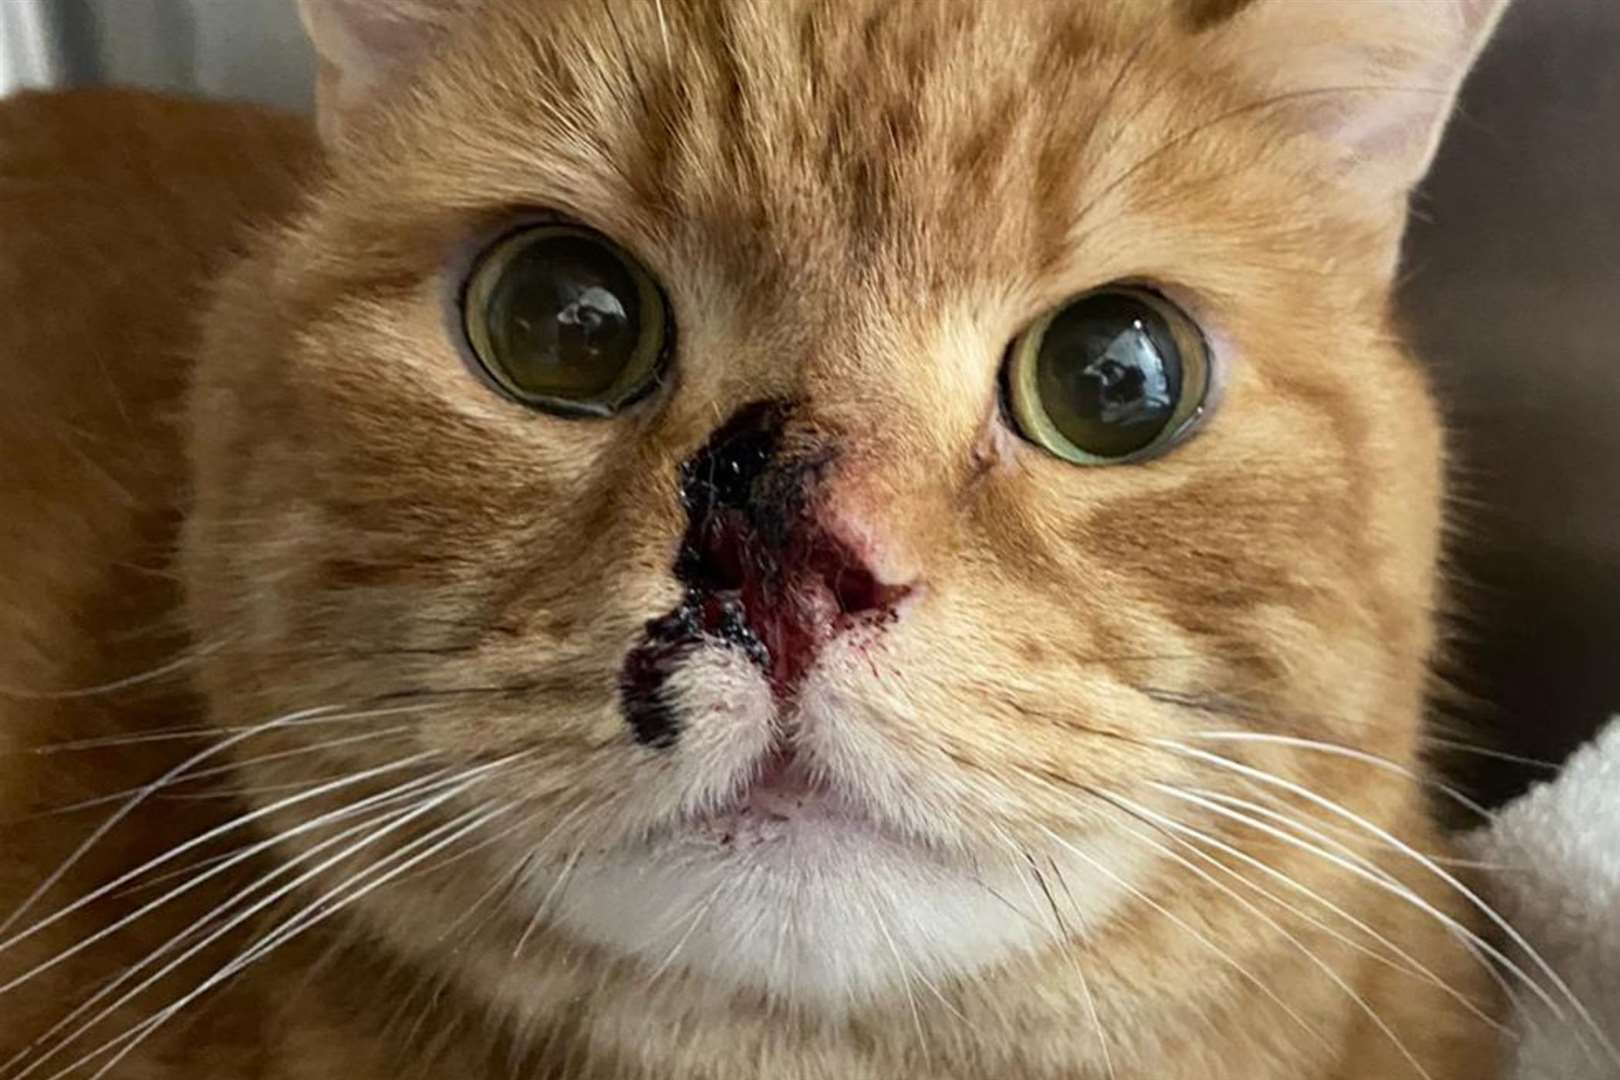 Trousers the cat was permanently maimed after being hit by a ball bearing last month